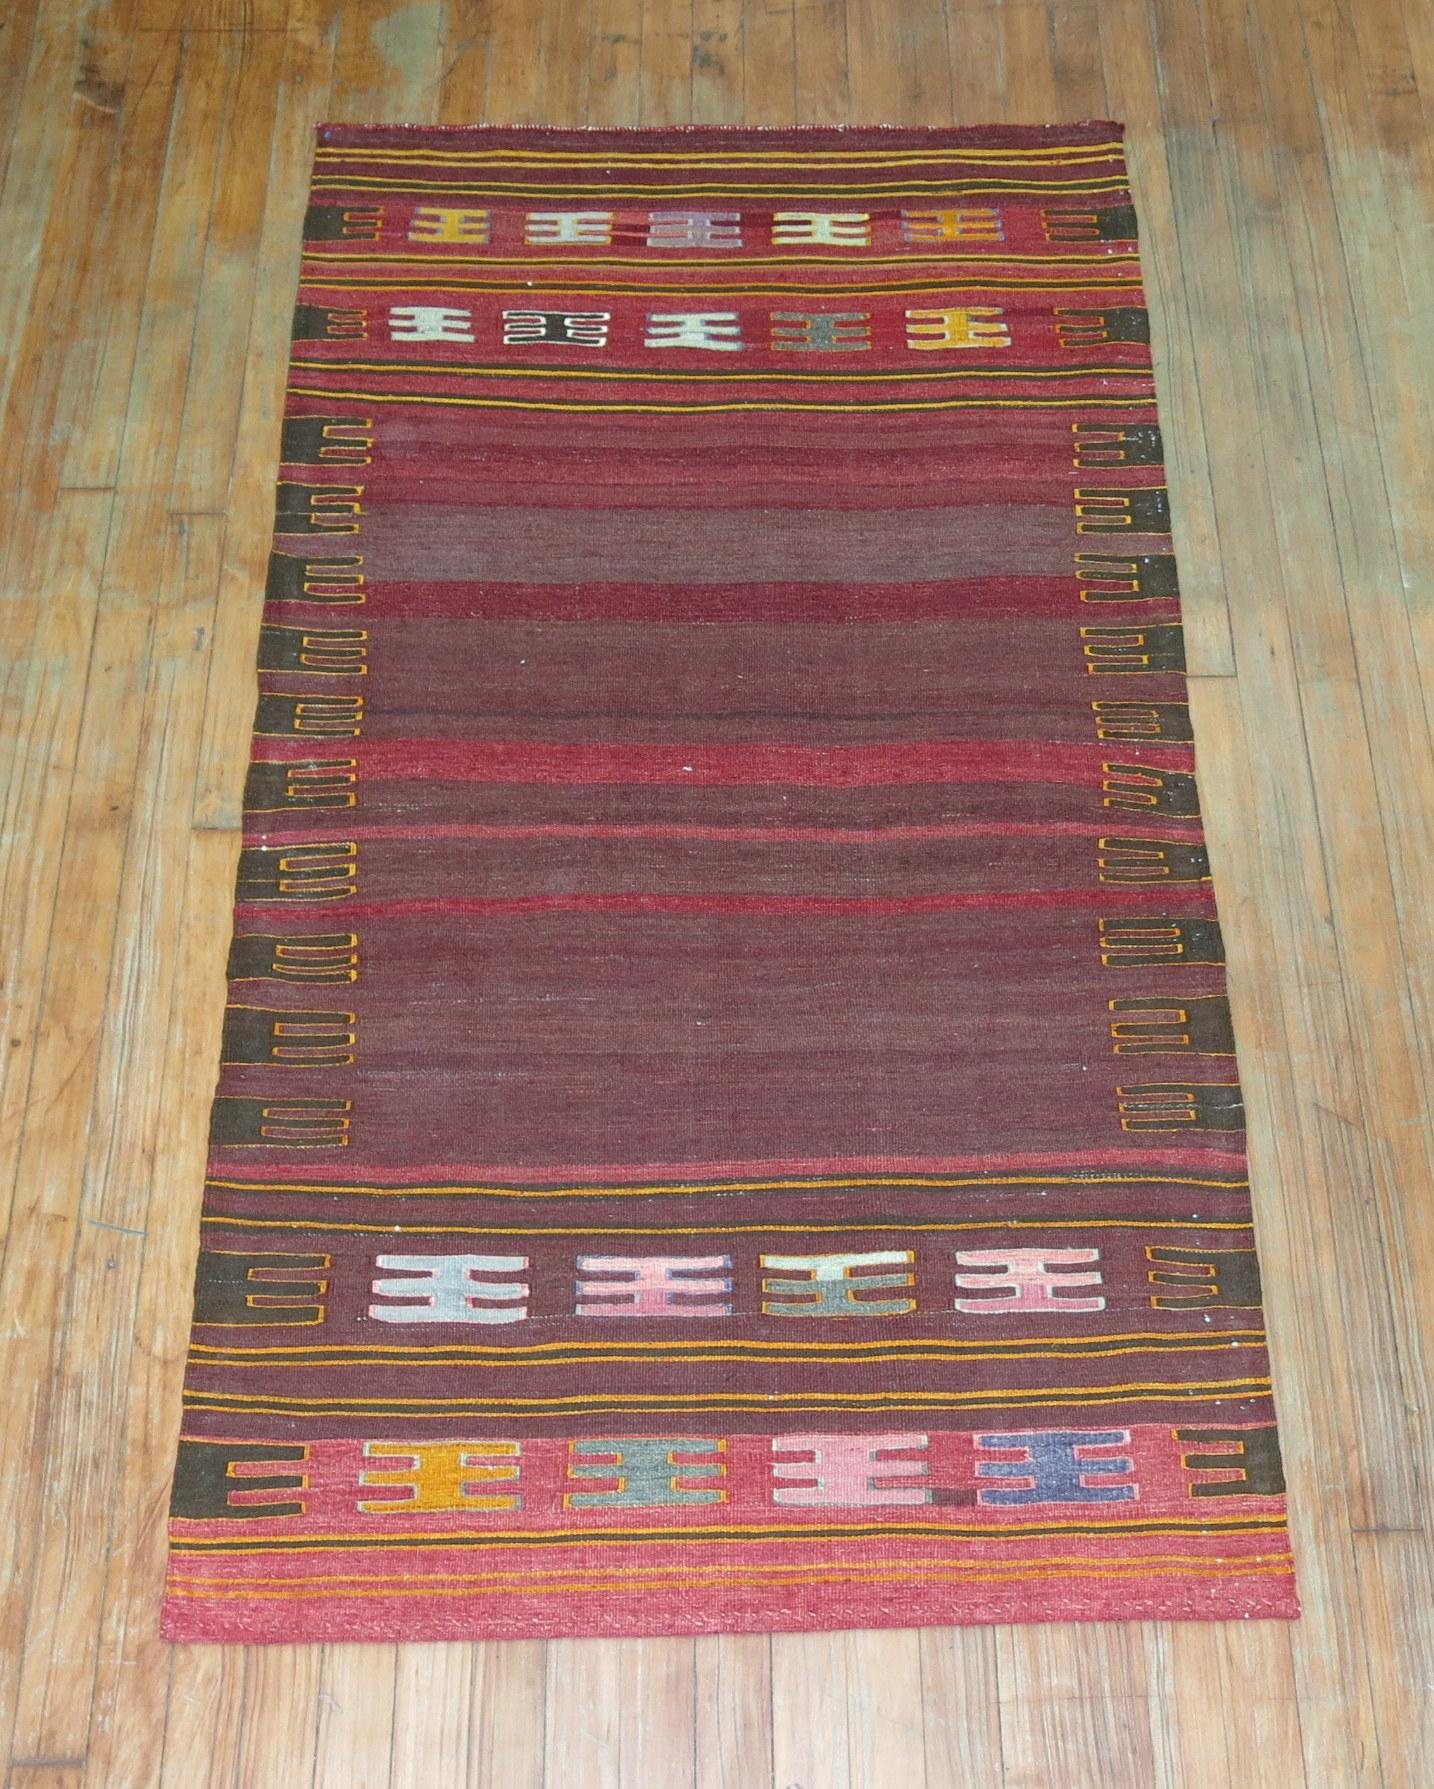 A vintage Persian Kilim scatter sofreh flat-weave from the middle of the 20th century.

Sofrehs are woven by Persian tribes as part of the dowry, used as floor spreads on which they would offer food for special guests. Their diminutive size and